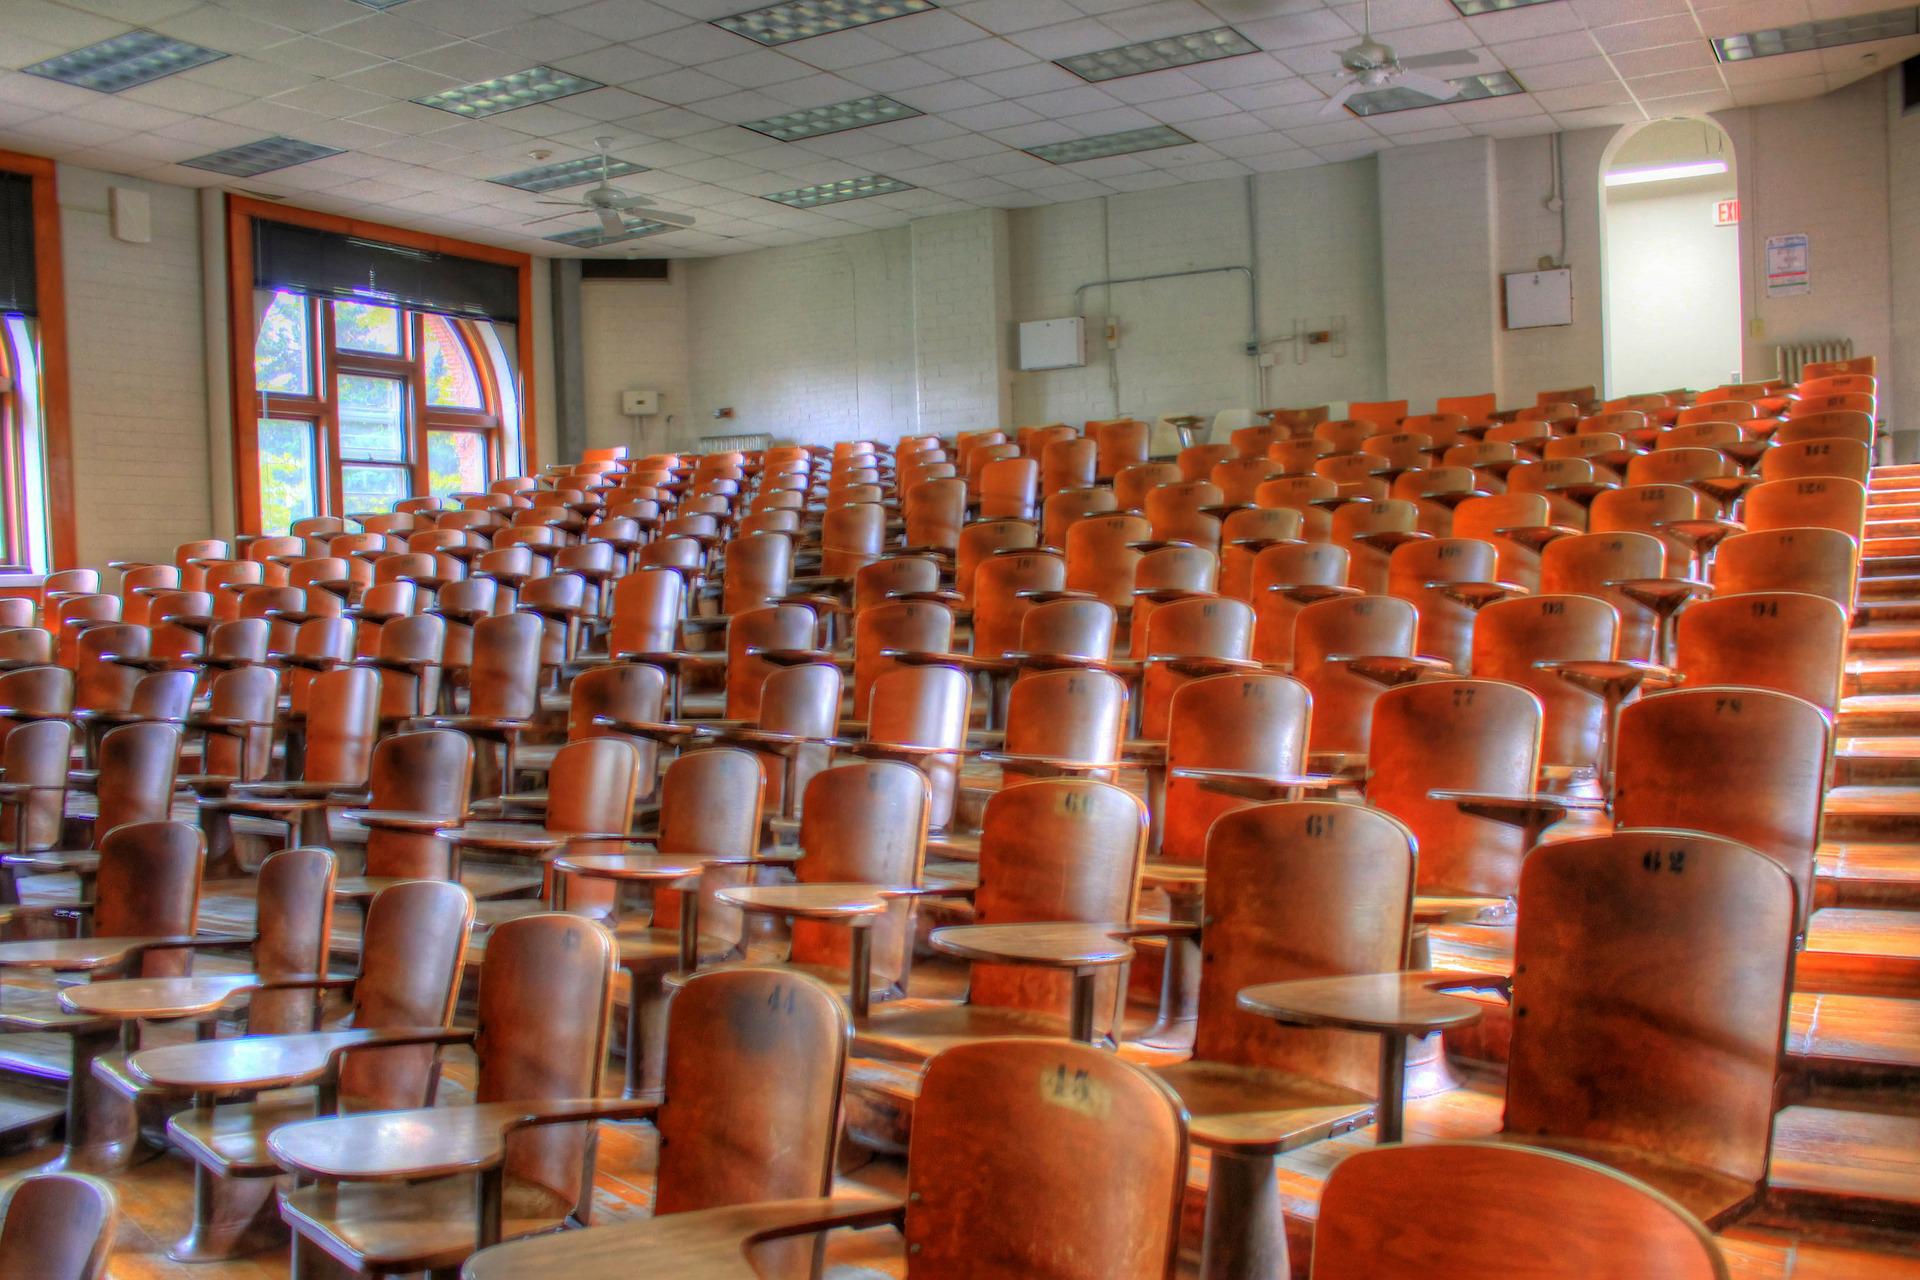 a set of empty seats in a lecture hall